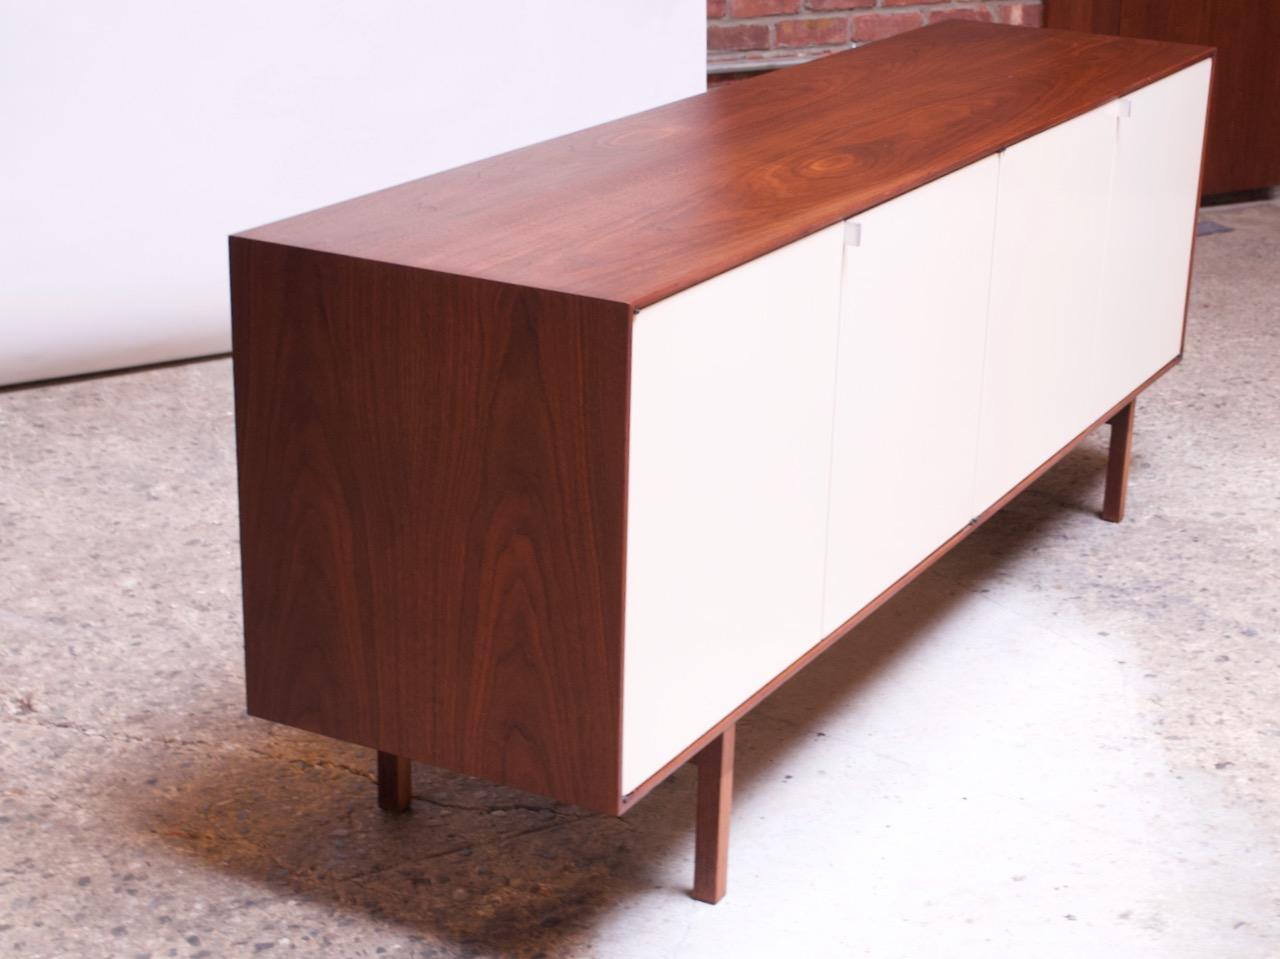 Credenza / cabinet (Model #541, circa 1952) designed by Florence Knoll for Knoll Associates composed of a walnut frame and legs with original off-white lacquered walnut doors and chrome pulls. Legs feature a unique vertical ply line detail.
Four